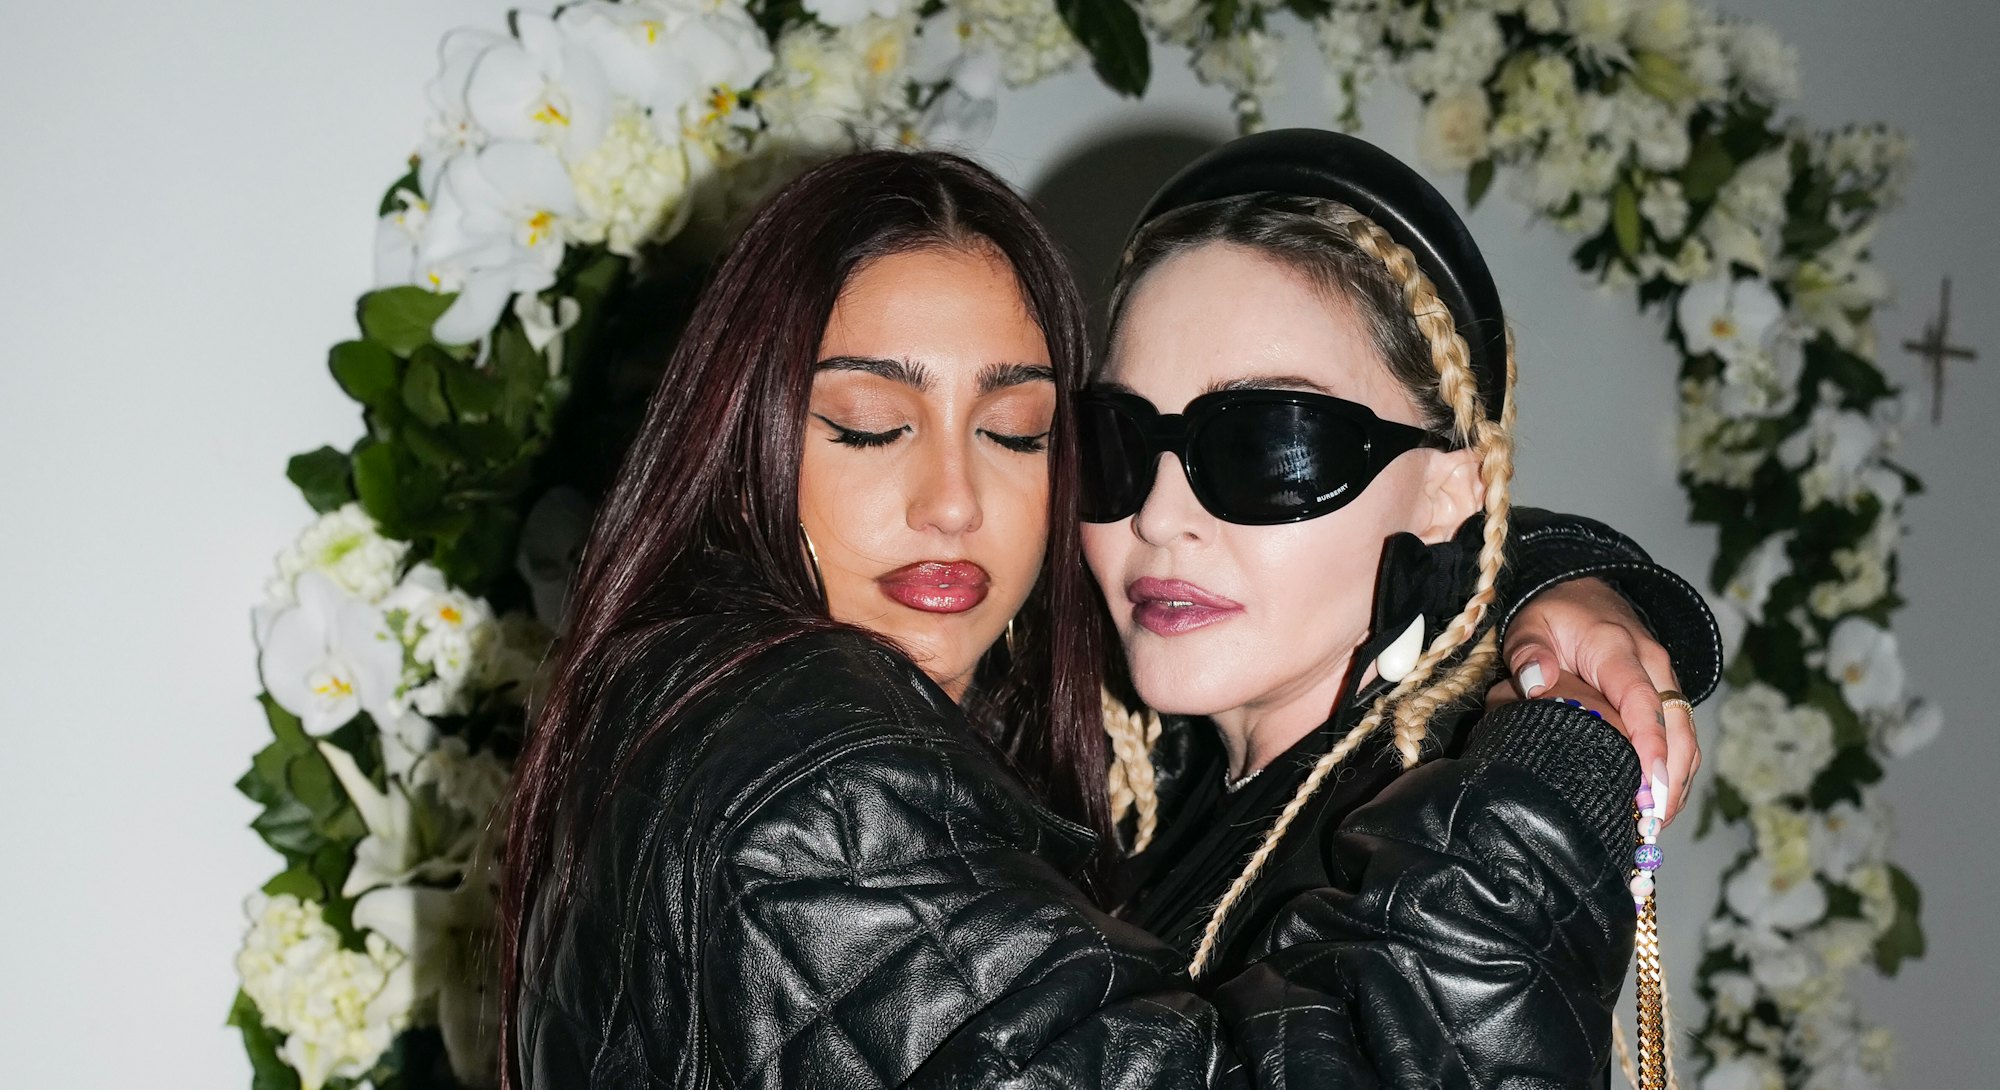 Lourdes Leon and Madonna celebrate Burberry’s new Lola bag in West Hollywood on April 20.